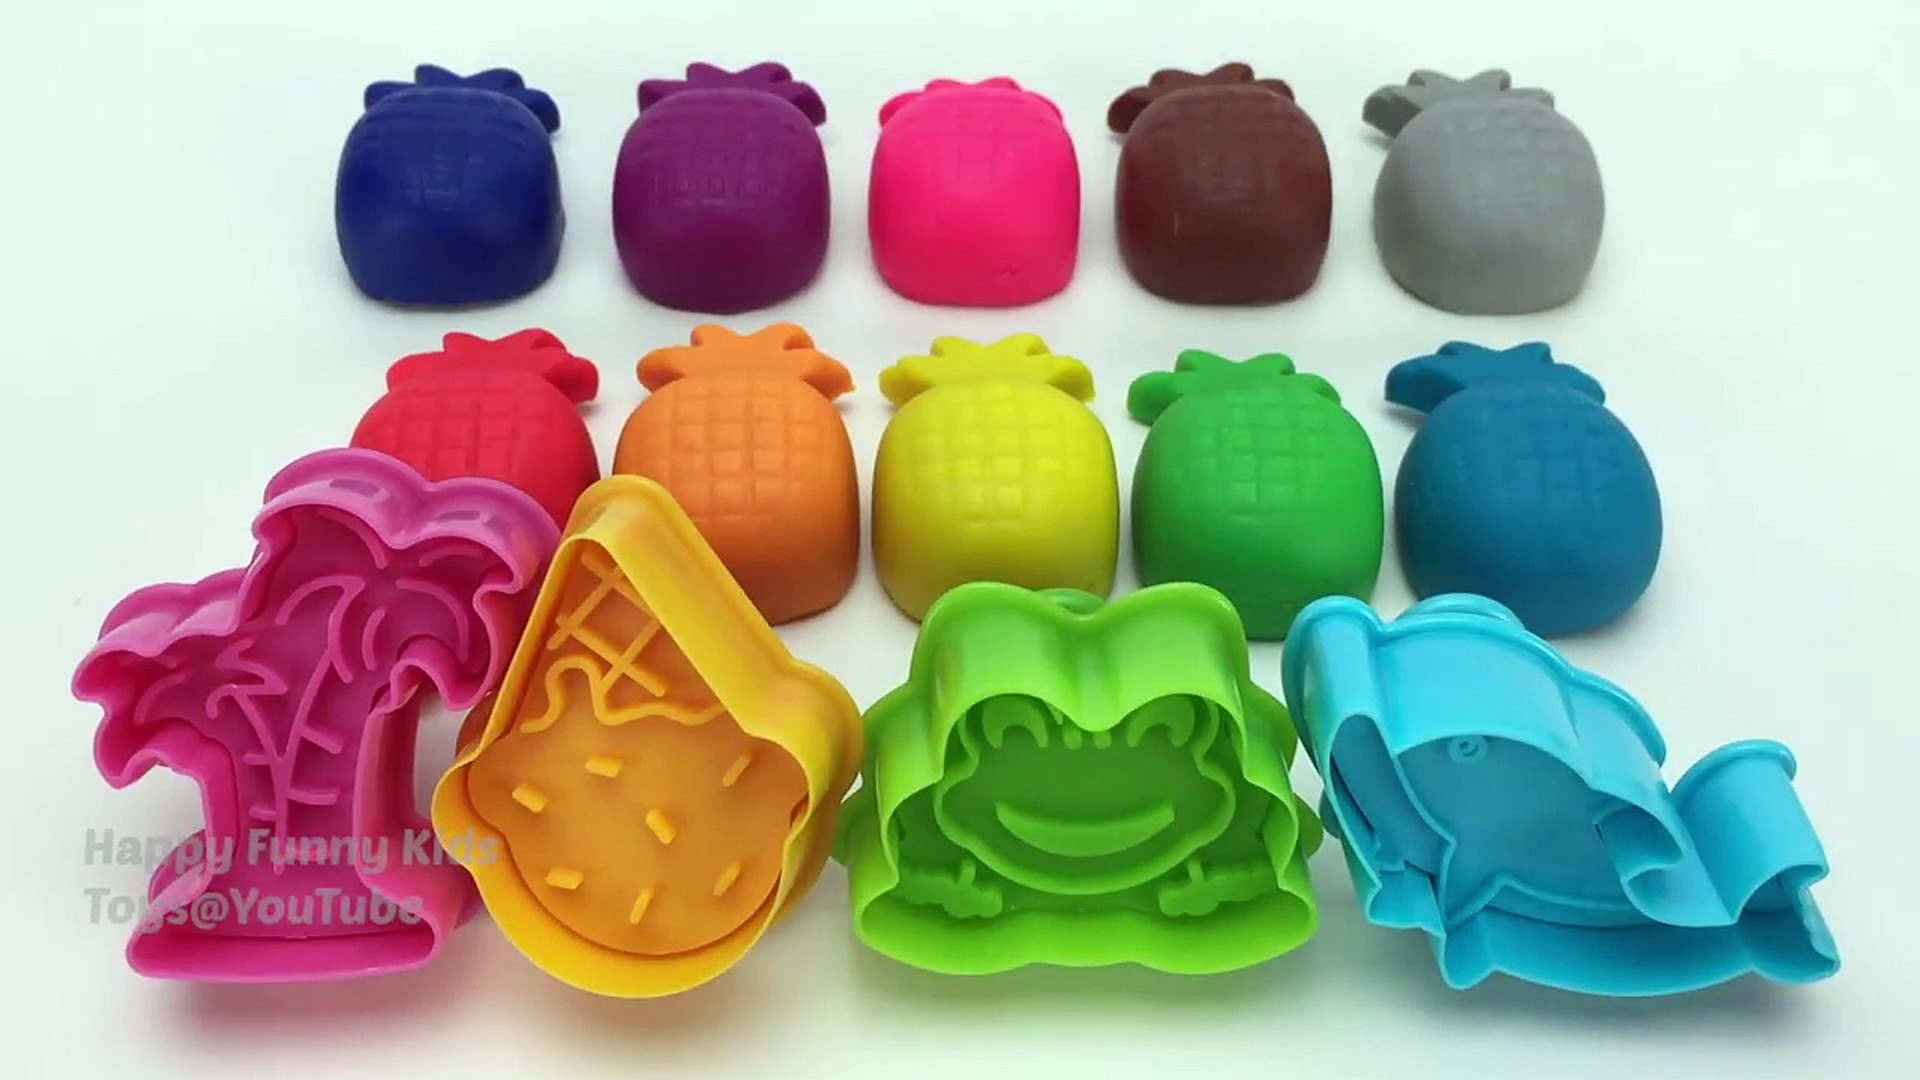 Learn Colors with 8 Color Play Doh Modelling Clay and Cookie Molds I  Surprise Toys Yowie 